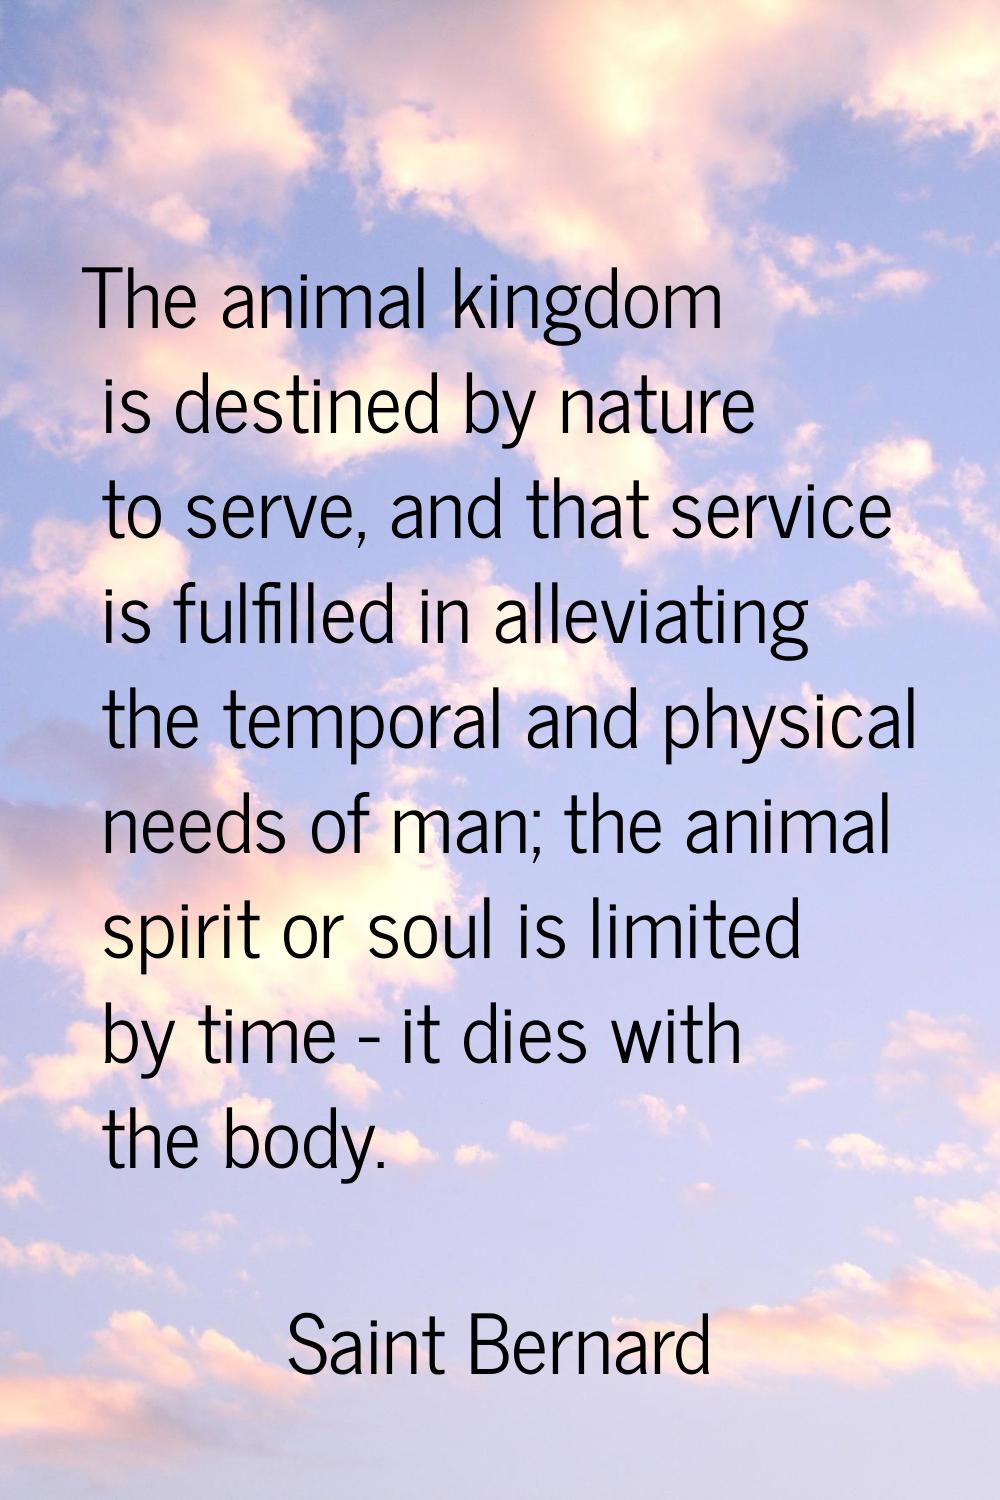 The animal kingdom is destined by nature to serve, and that service is fulfilled in alleviating the